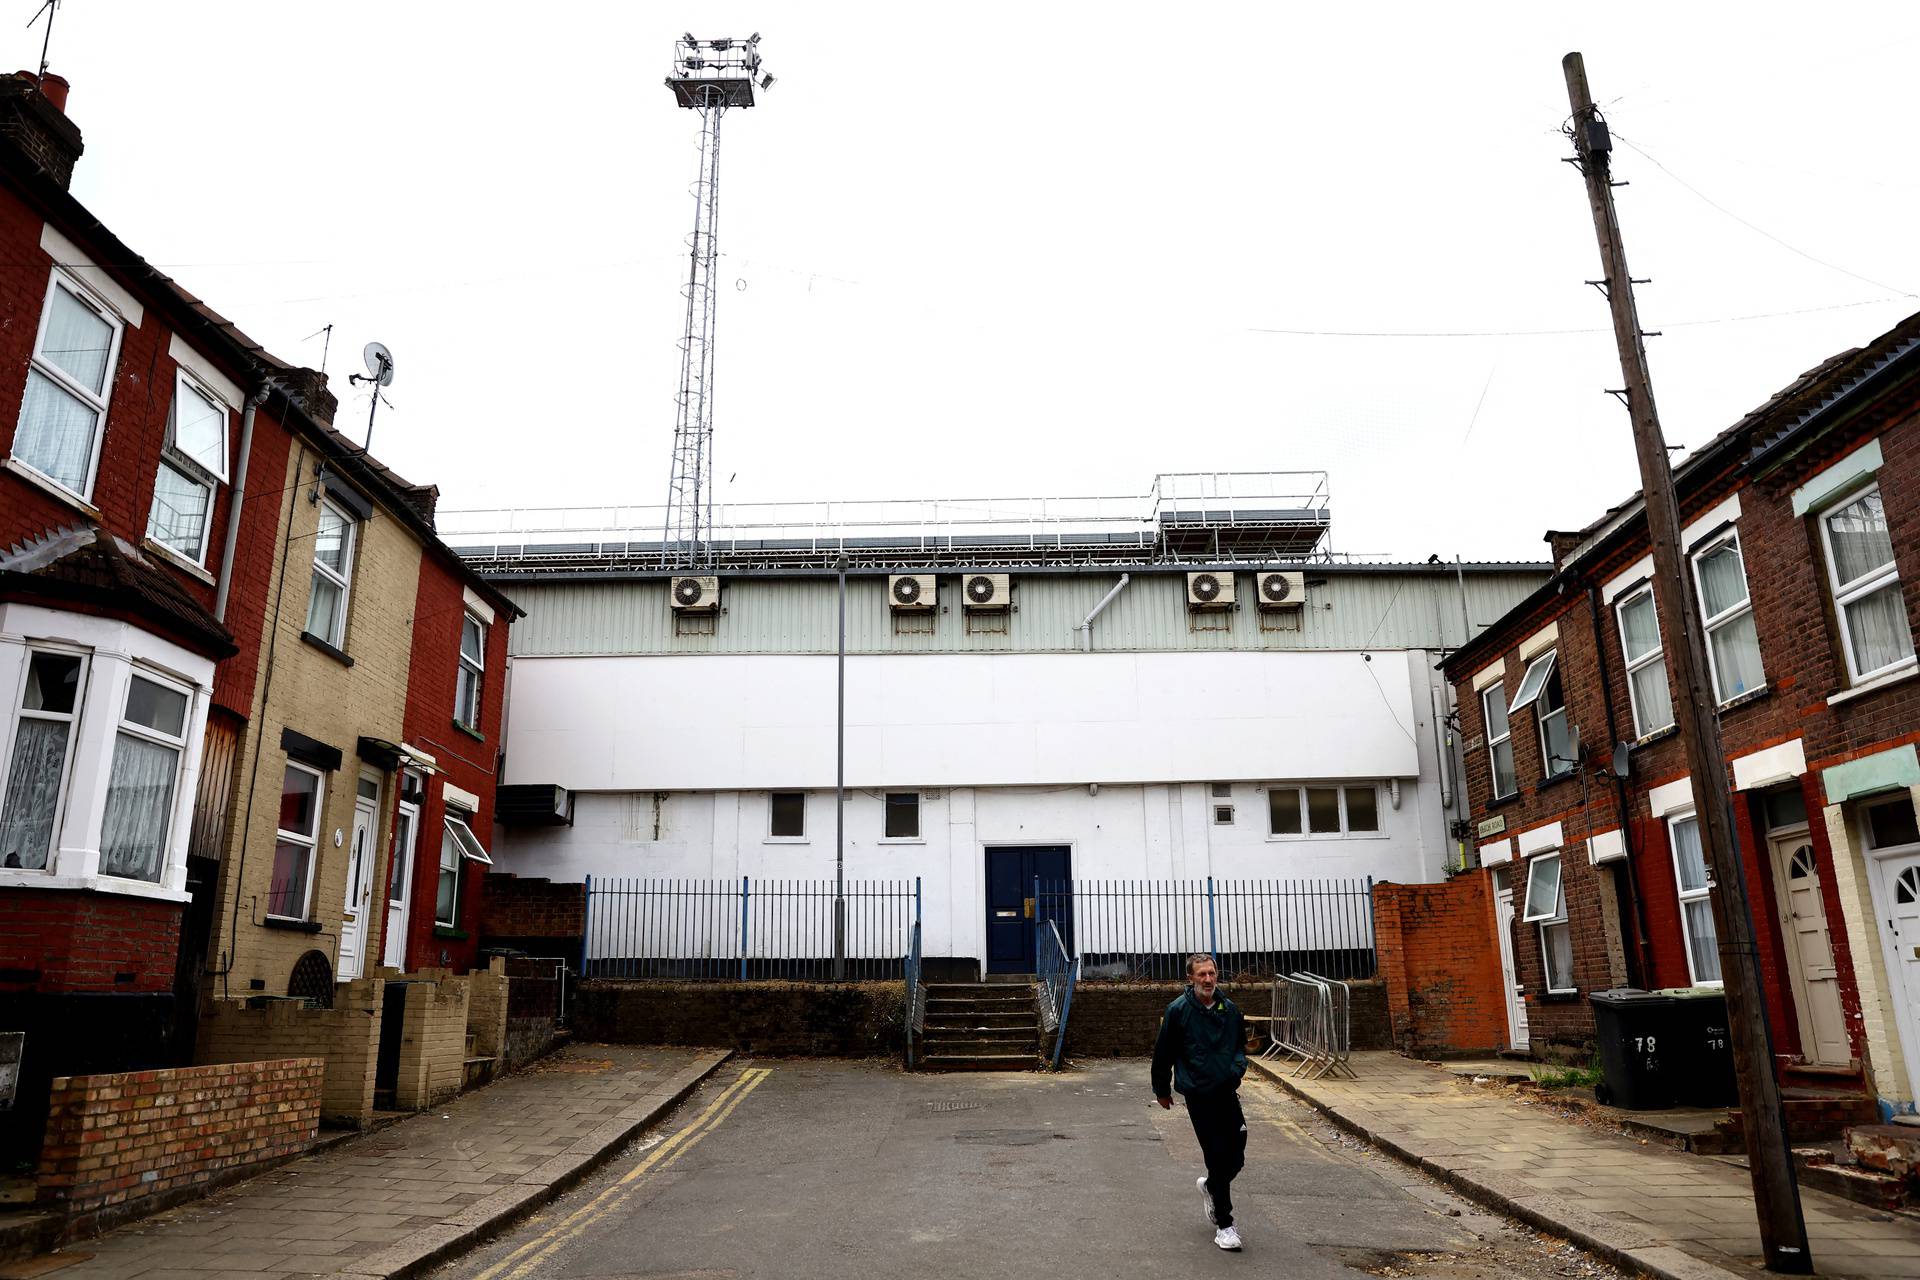 A view of Luton Town's Kenilworth Road stadium